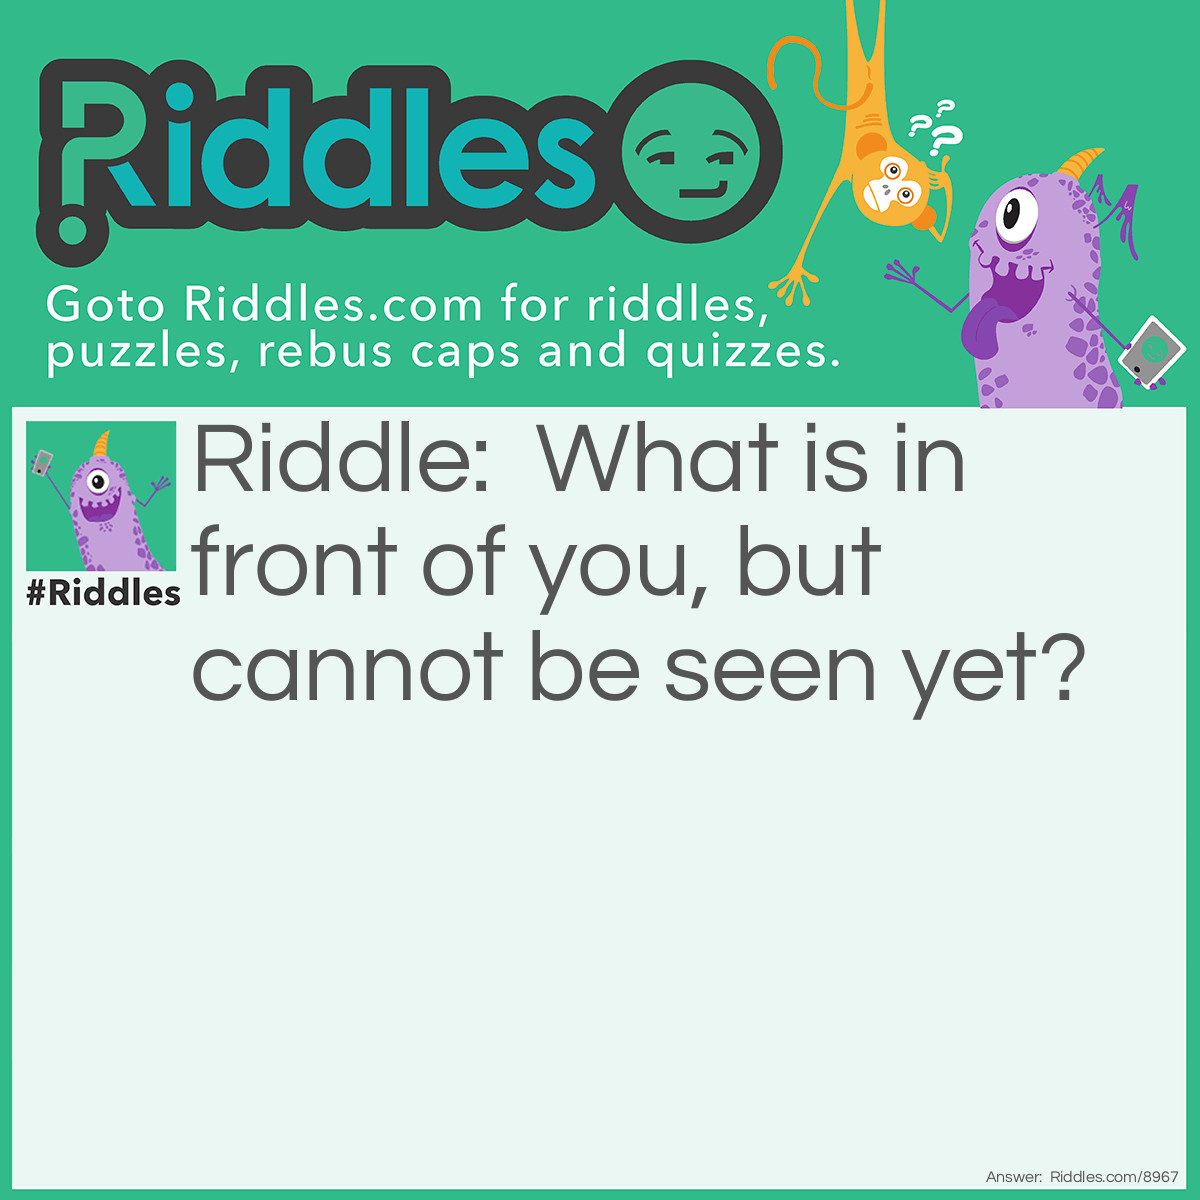 Riddle: What is in front of you, but cannot be seen yet? Answer: Your future.